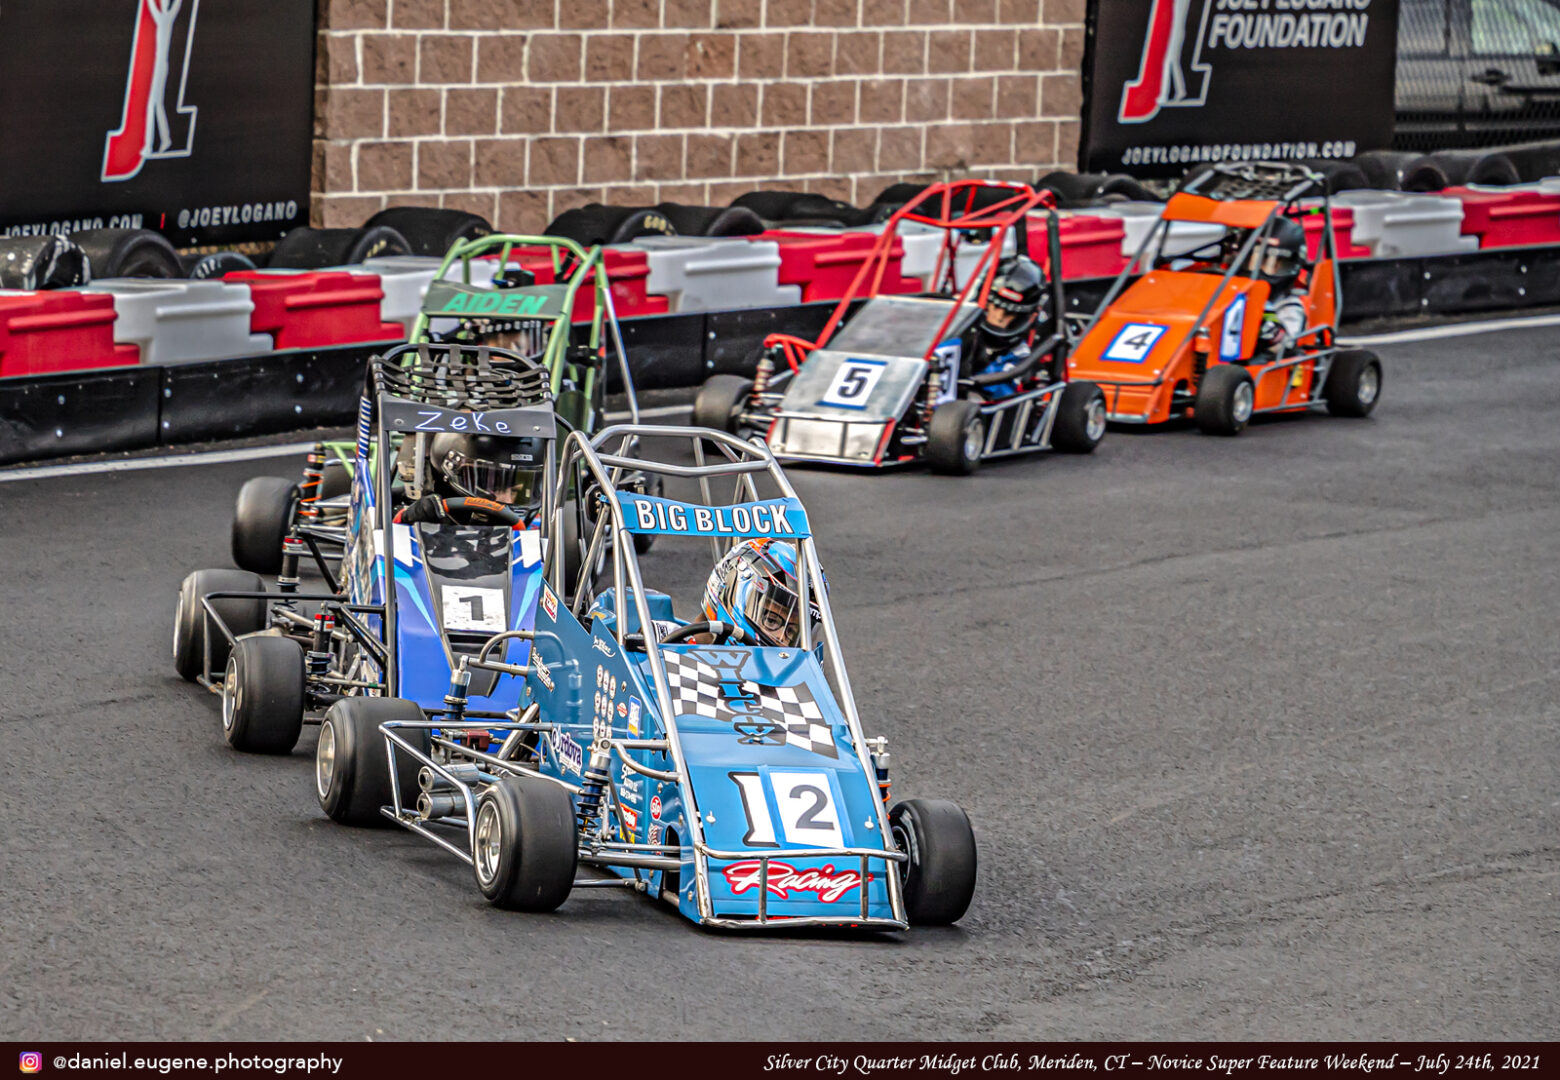 Children in Different Color Karts on a Racing Track